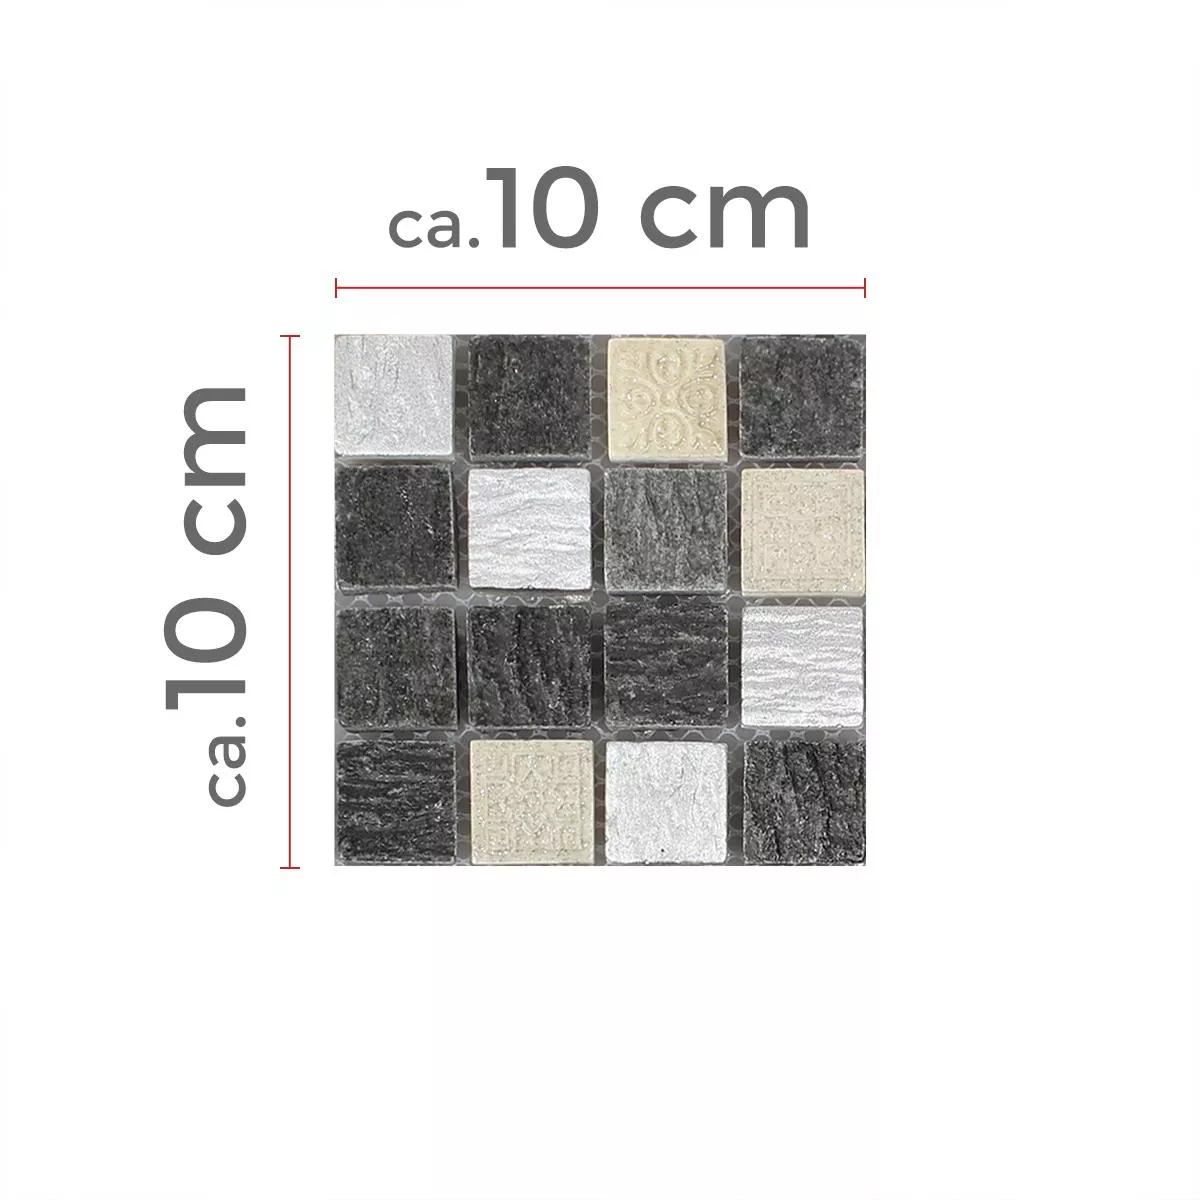 Sample Glass Mosaic Natural Stone Tiles Colicos Grey Black Silver